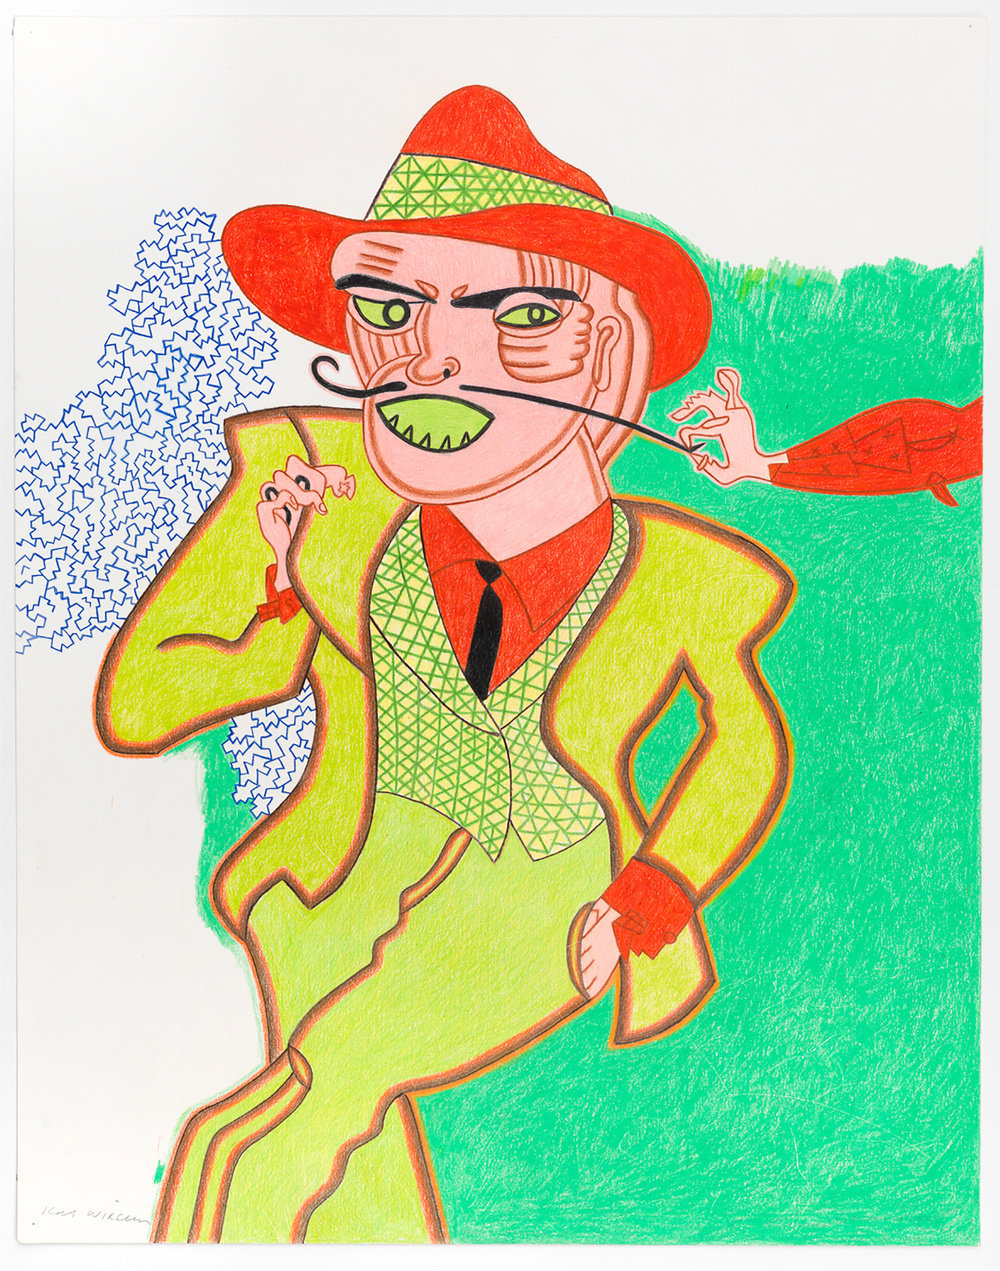 A color pencil and graphite on paper drawing by Karl Wirsum of a figure in a green suit, red shirt and red hat on a mostly green background. A hand emerging from out of frame is pulling on the figures mustache.  